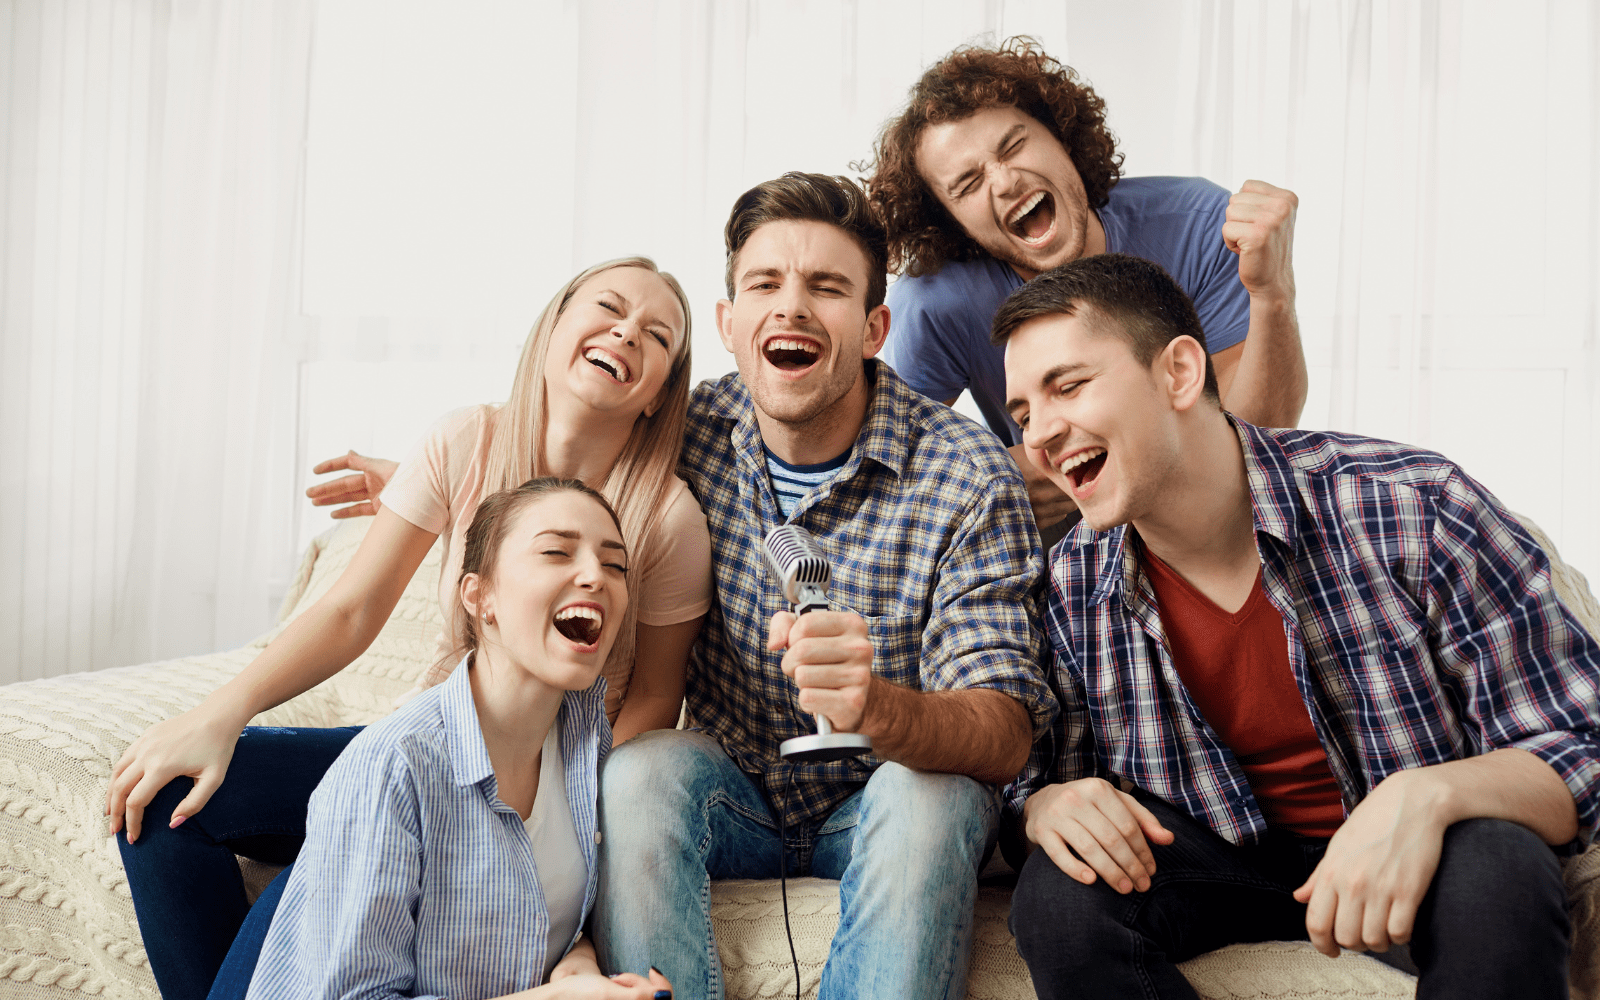 A group of male and female friends singing into a microphone while sitting together on a couch.